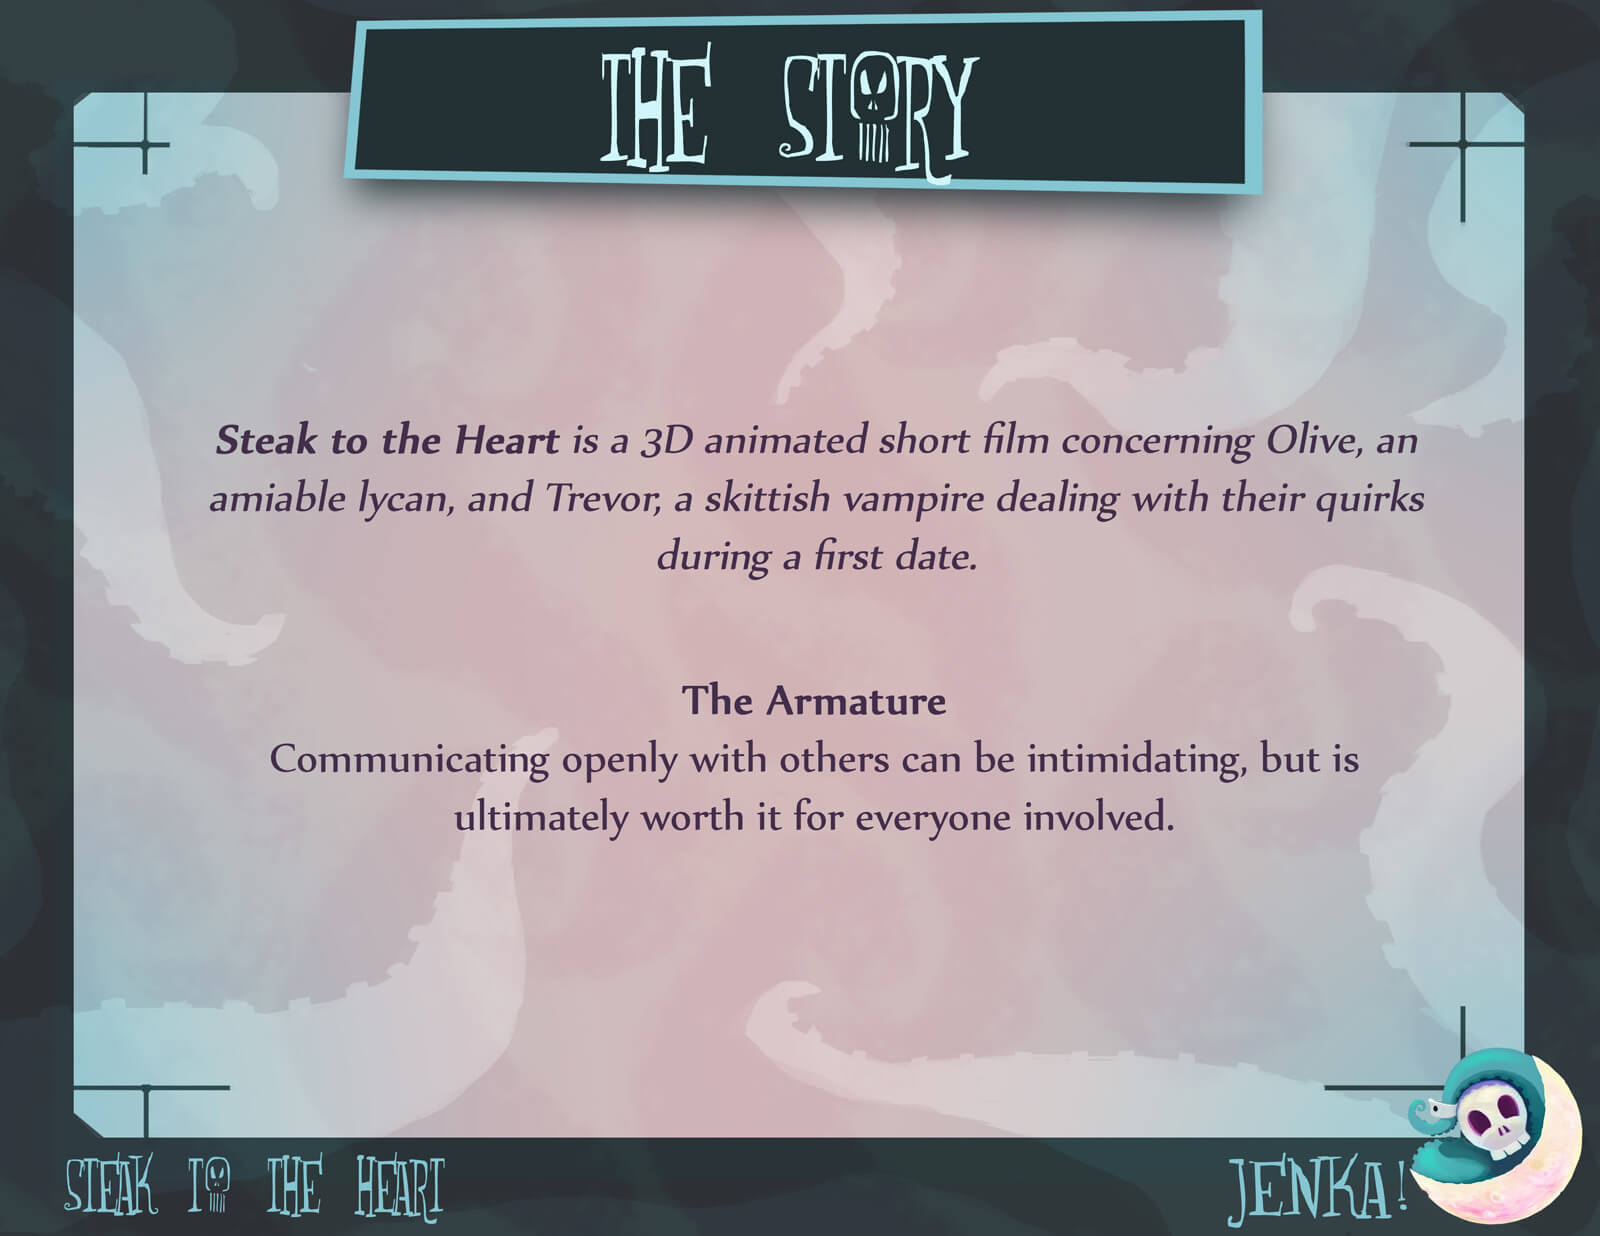 Story slide for the film Steak to the Heart, describing the plot and overall message of the action